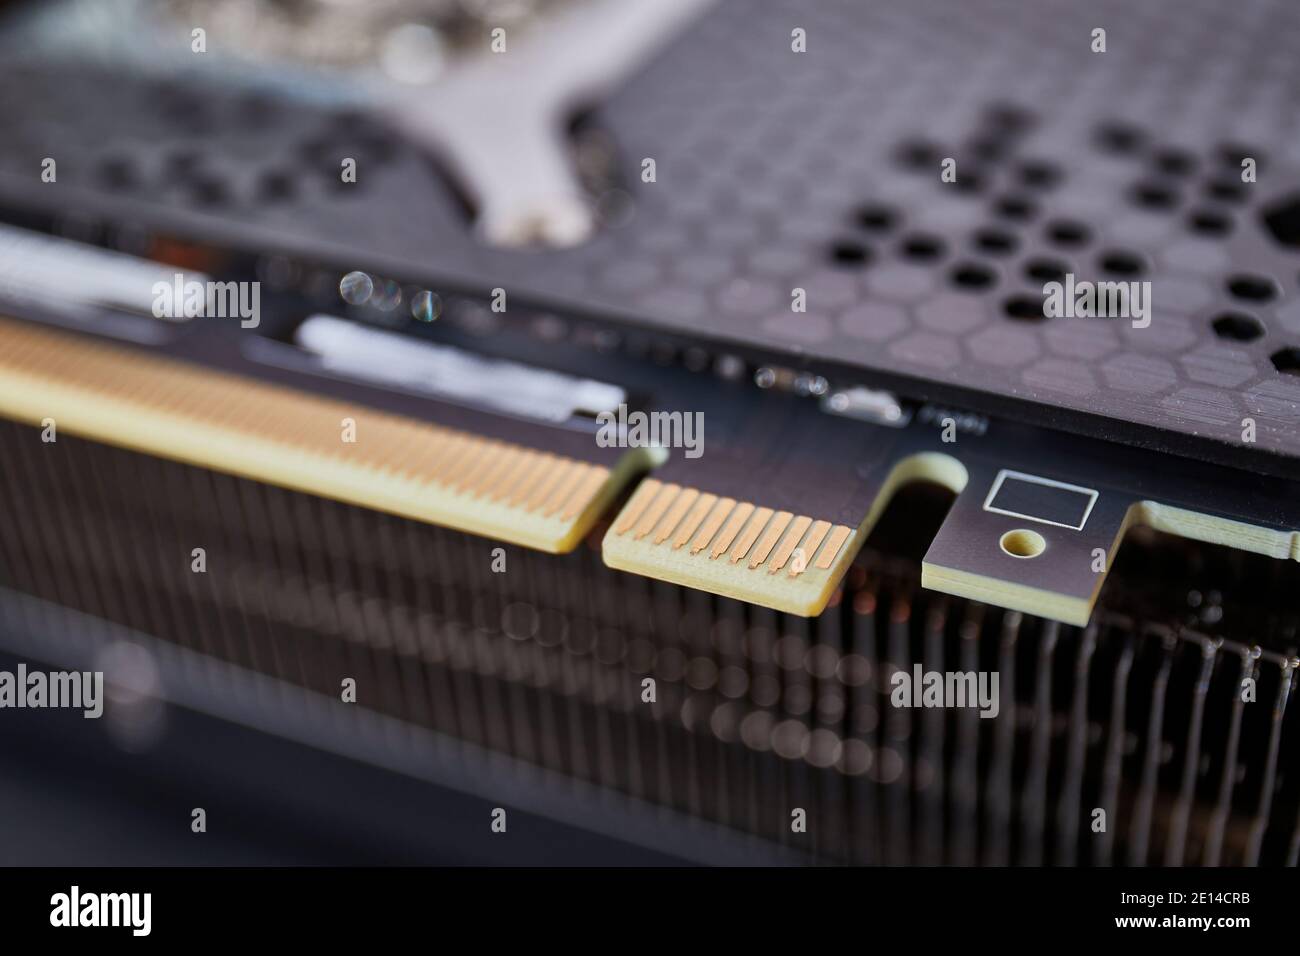 PCI express connector standard on a graphics card Stock Photo - Alamy